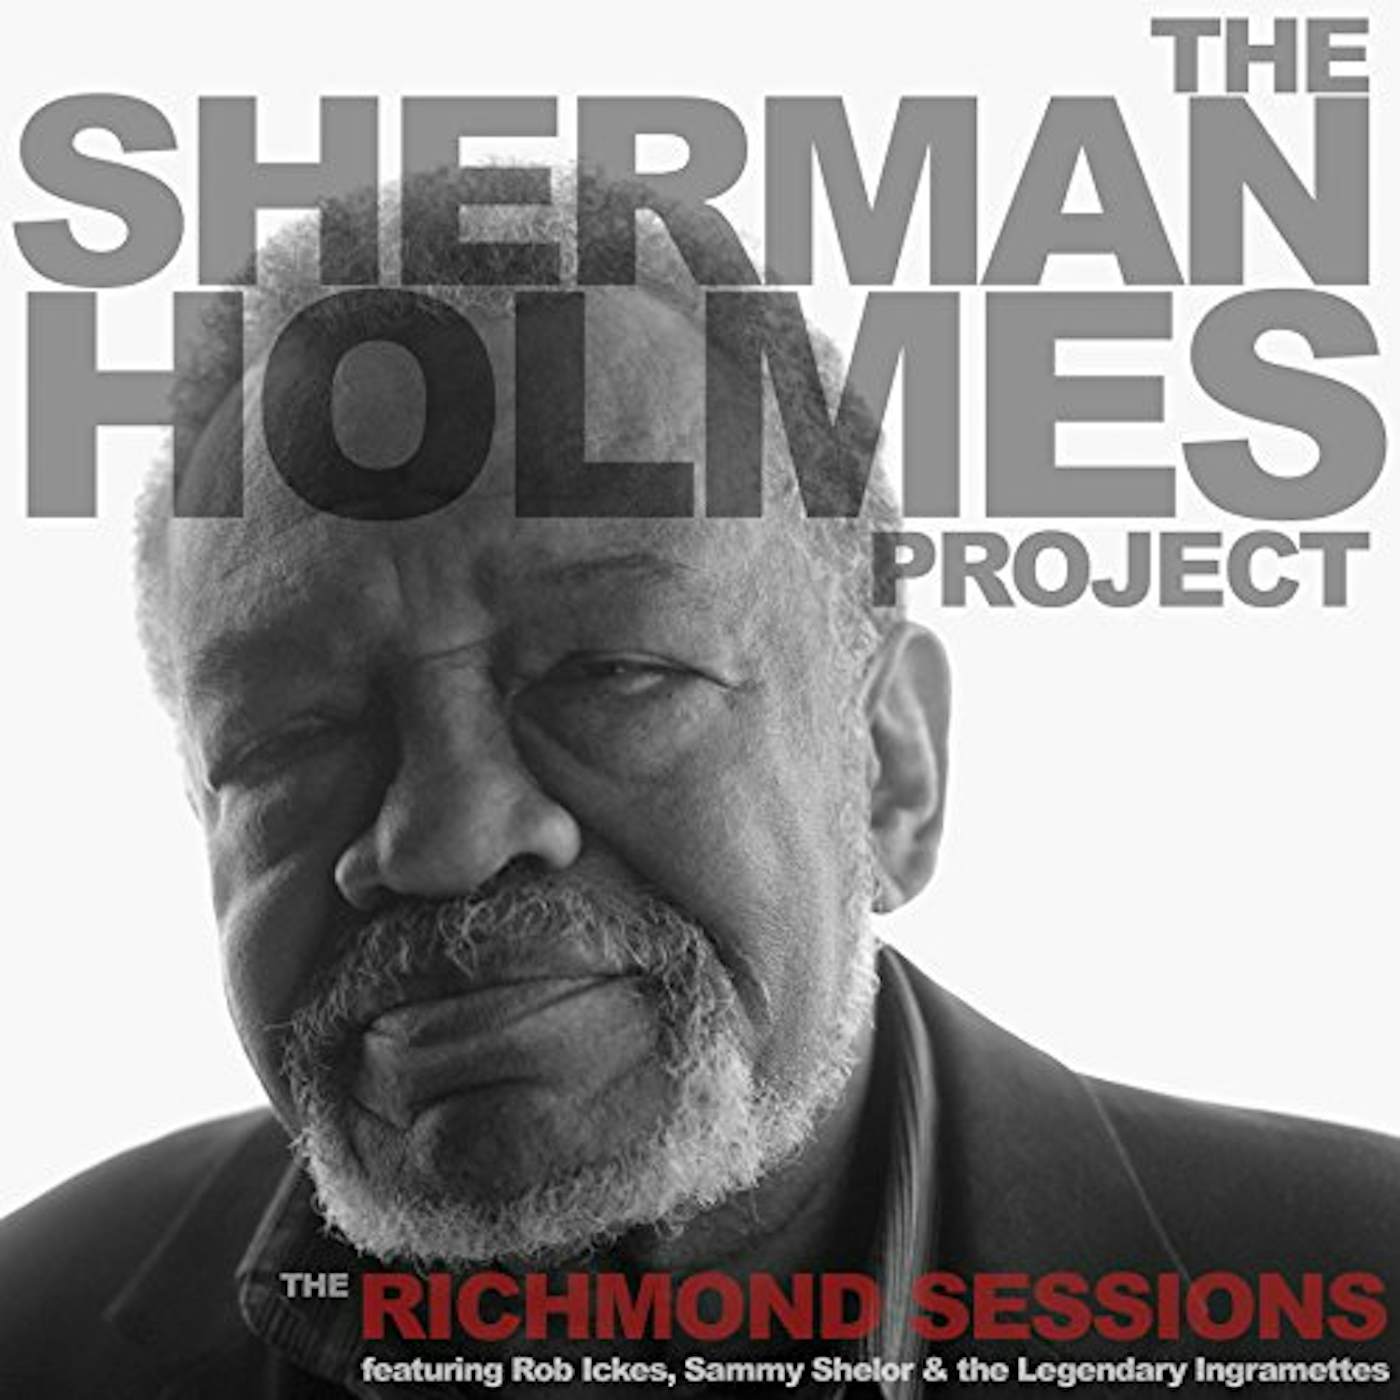 SHERMAN HOLMES PROJECT: THE RICHMOND SESSIONS CD